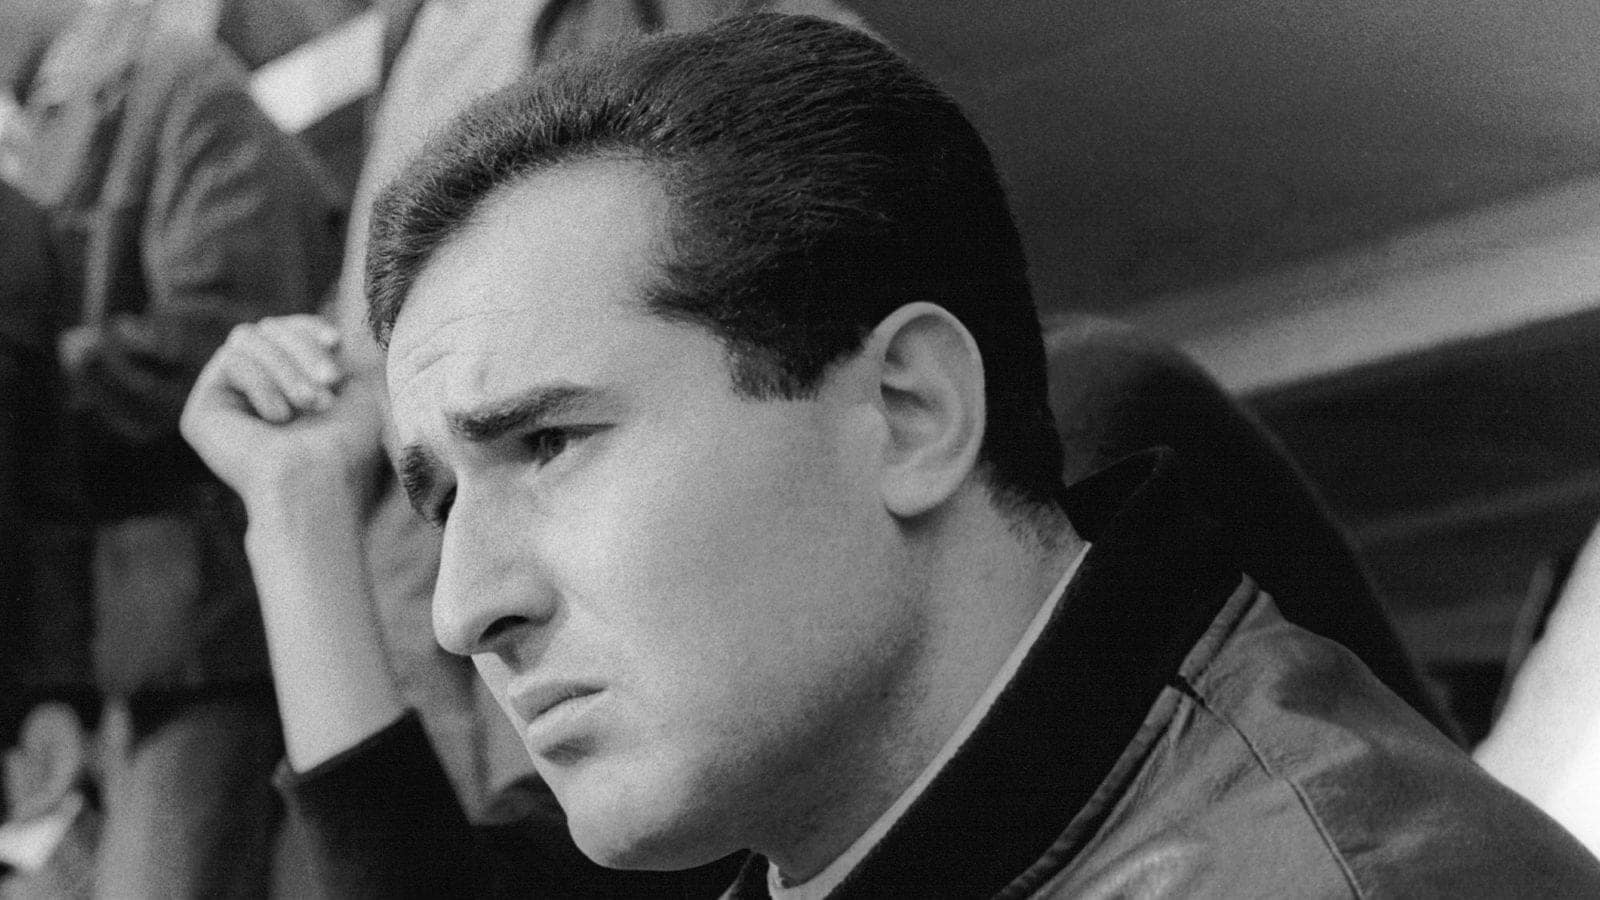 Lorenzo Bandini, 24 Hours of Le Mans, Le Mans, 16 June 1963. (Photo by Bernard Cahier/Getty Images)